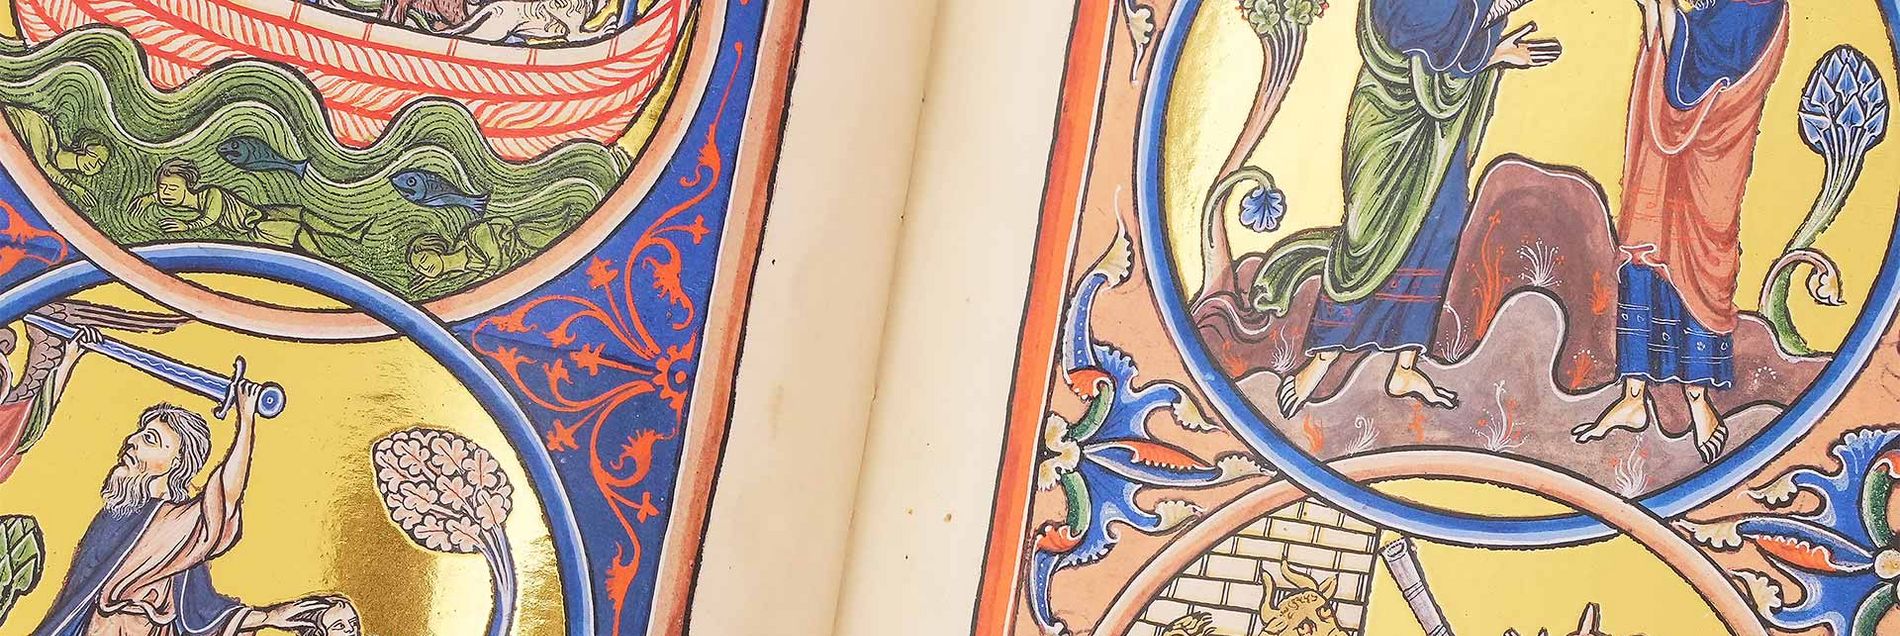 <i>“A book treasure shining with light from the magnificent Sainte Chapelle in Paris”</i>